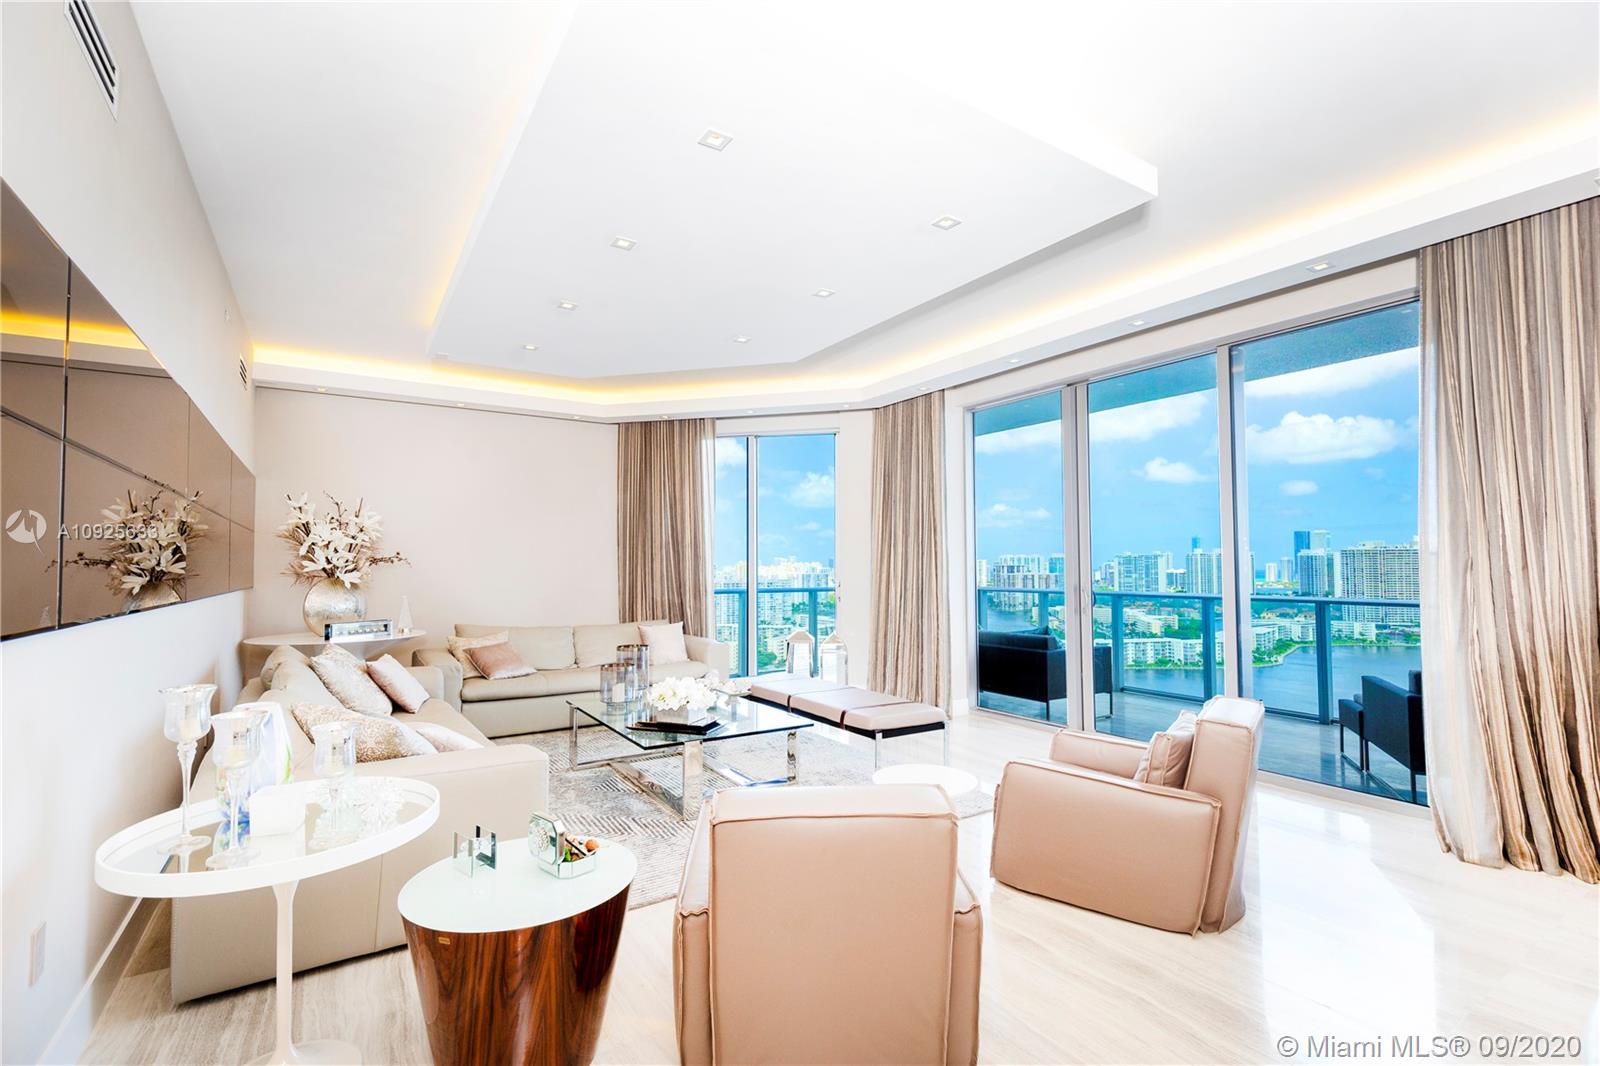 Introducing this spectacular Lower Penthouse at the Marina Palms Residences, featuring 3 bedrooms plus den and 3.5 bathrooms, unit designed by Gabriela Blasini, meticulously finished with high-end building materials, led hidden infinity lights, 2,390 Sq.Ft of marble floors, large balcony with an amazing panoramic views of intracoastal and all over Sunny Isles. No matter if you are a passionate about waterfront living, the sensations and lifestyle that you will experience at Marina Palms is indescribable, you have to live it! Yes, you just found the luxury lifestyle and marina you were looking for. PROPERTY IS RENTED UNTIL NOVEMBER 16TH 2022 FOR $9,500/ MONTH.